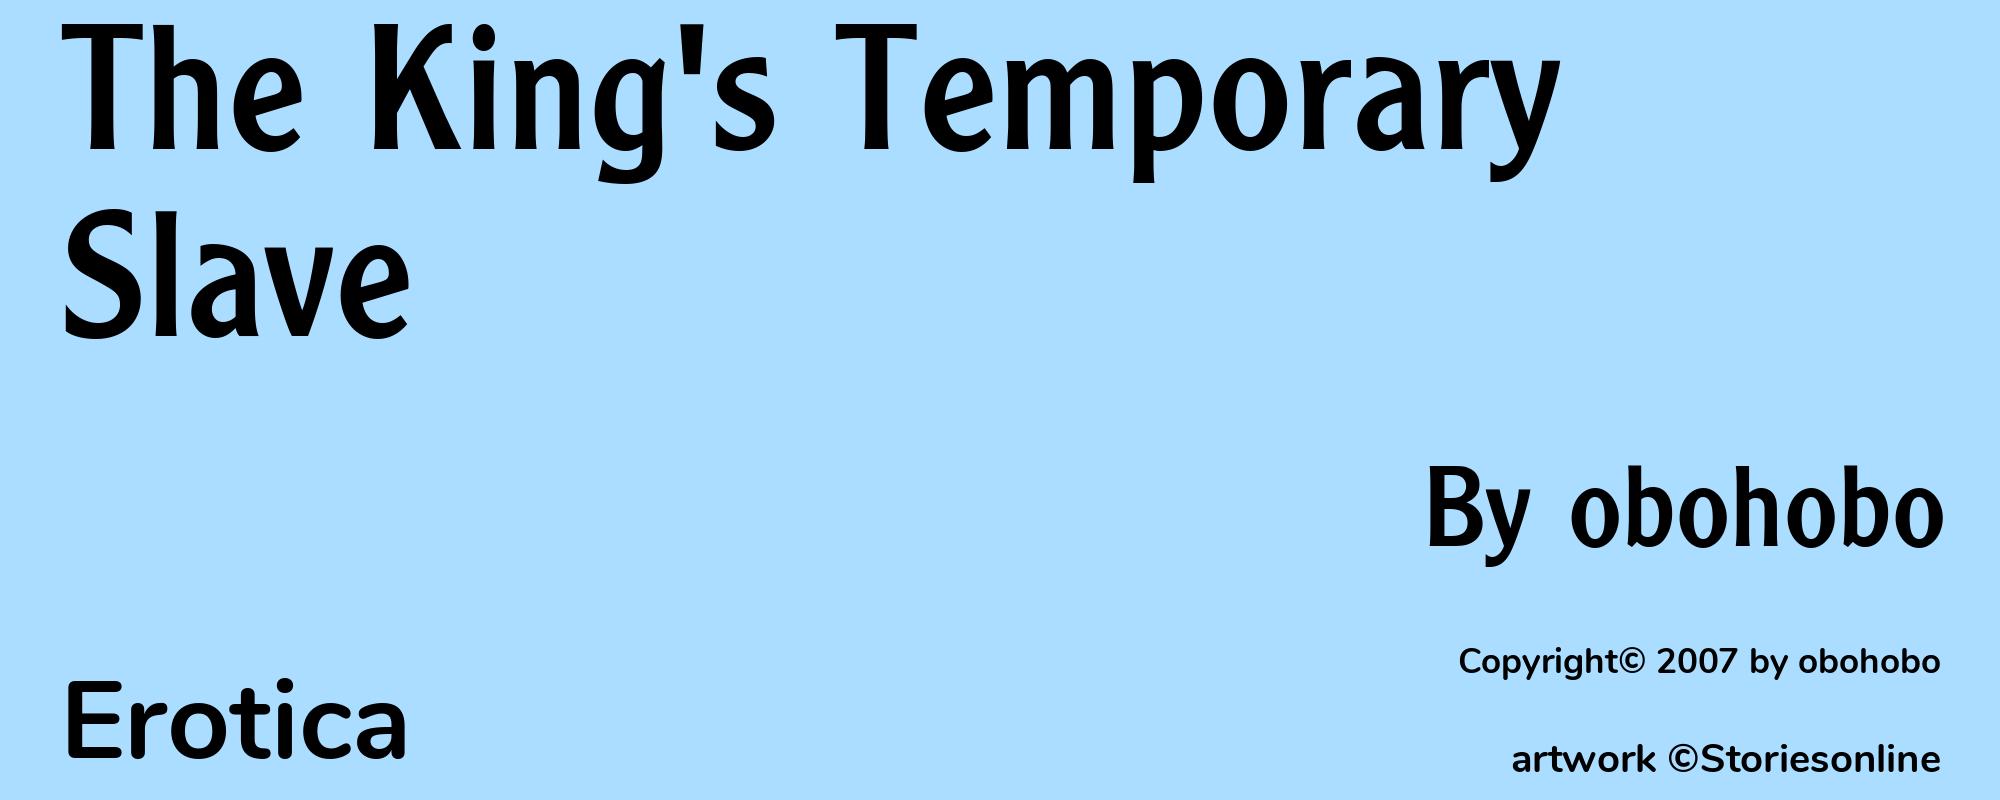 The King's Temporary Slave - Cover